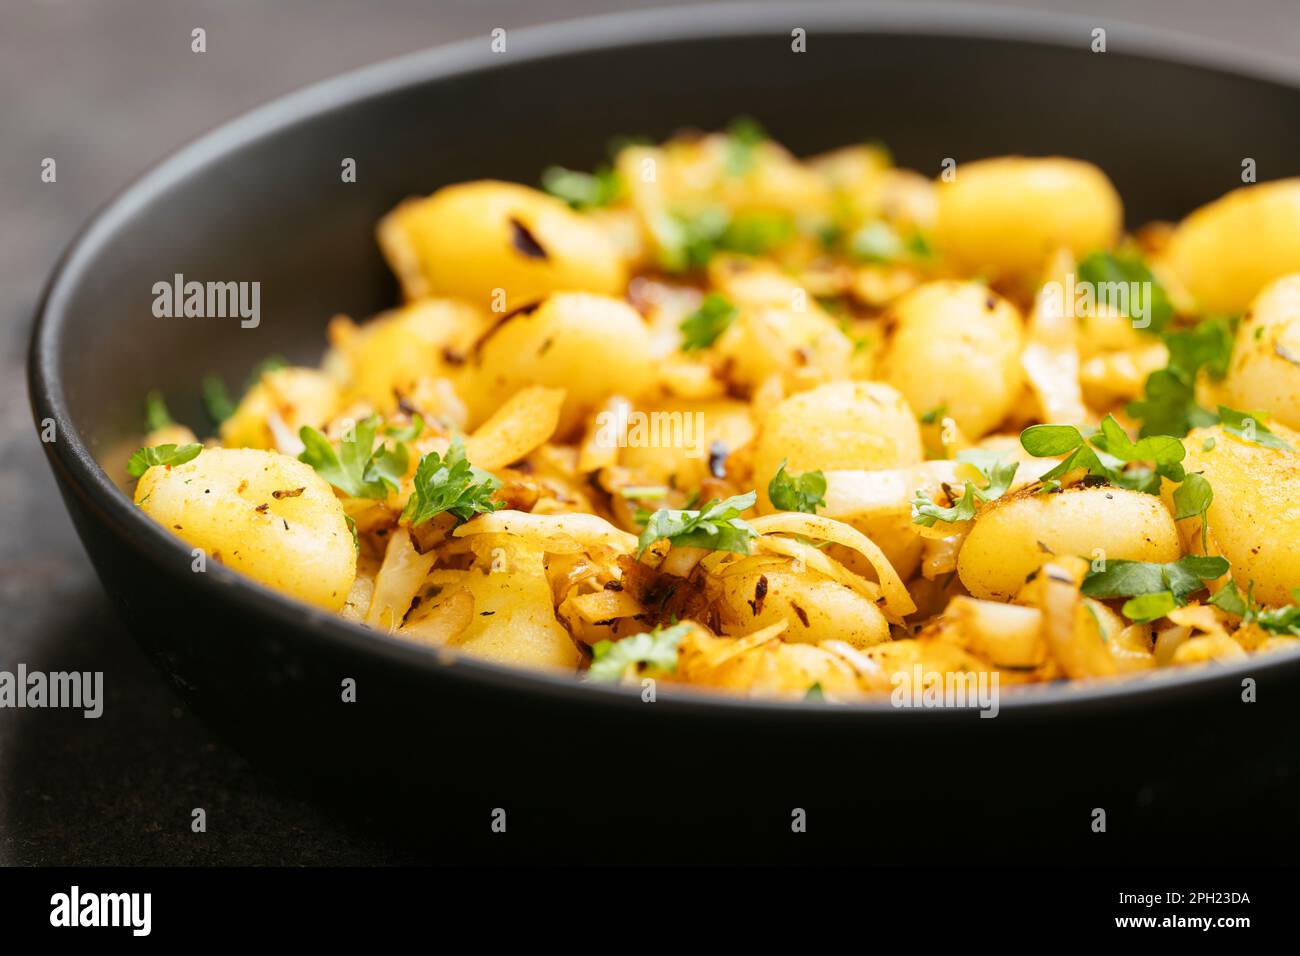 Fried gnocchi with chopped cabbages and cajun spices. Stock Photo